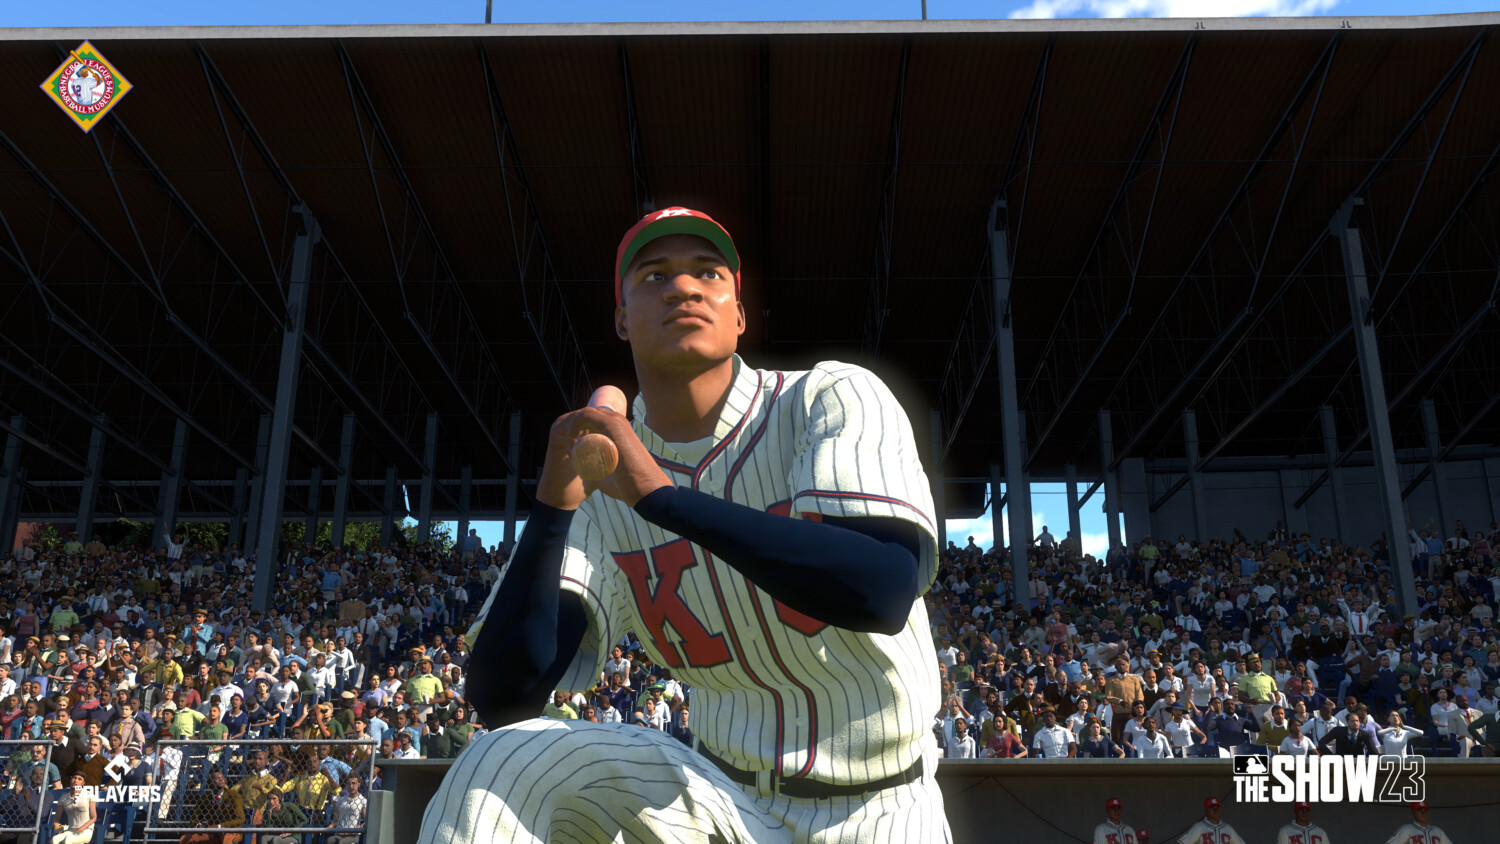 MLB The Show 23's Storylines mode tells the Negro Leagues' history